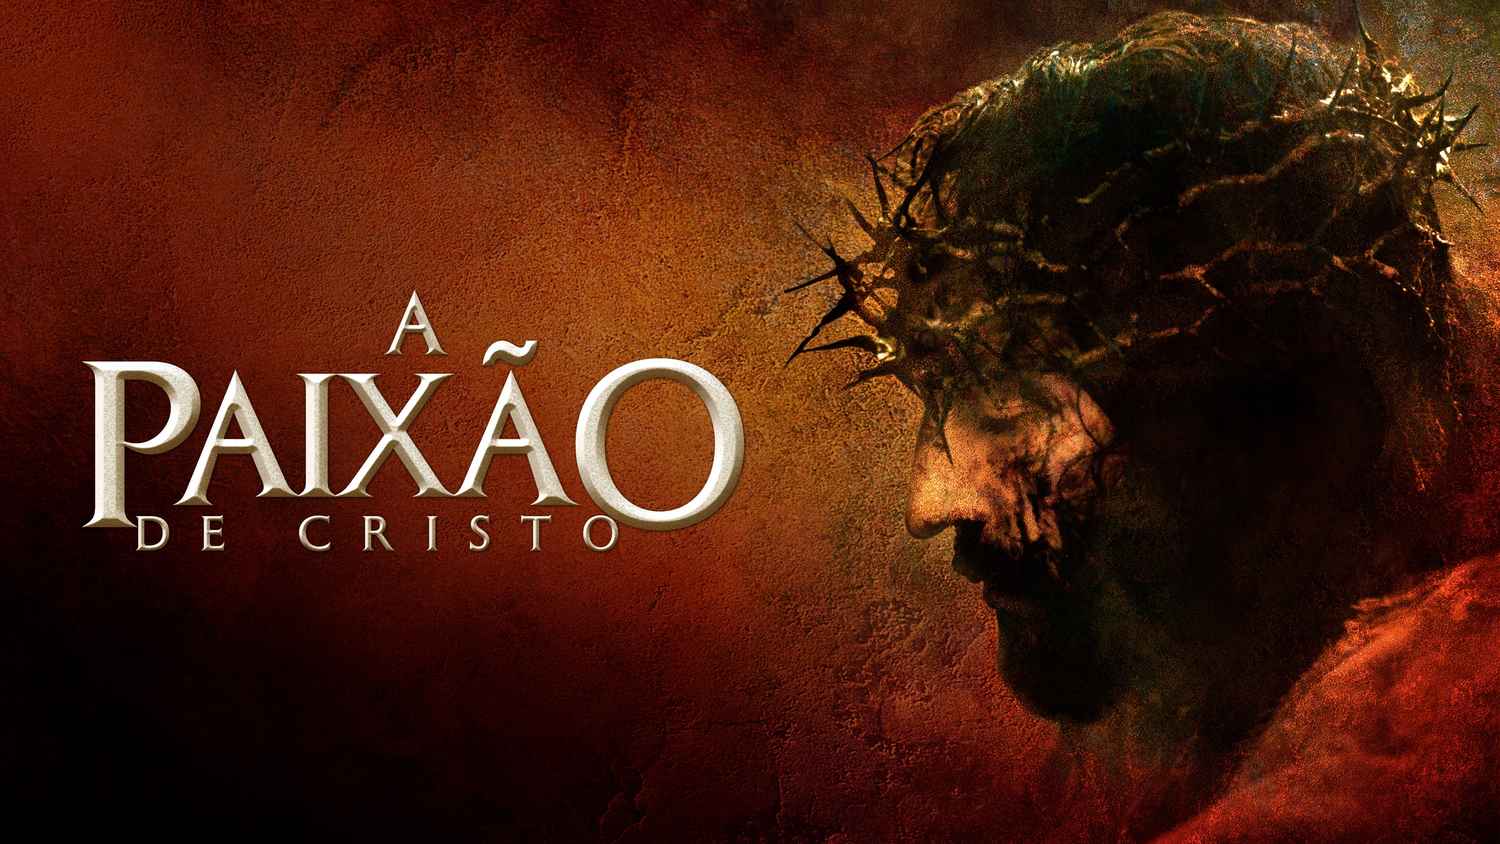 the passion of christ movie free online